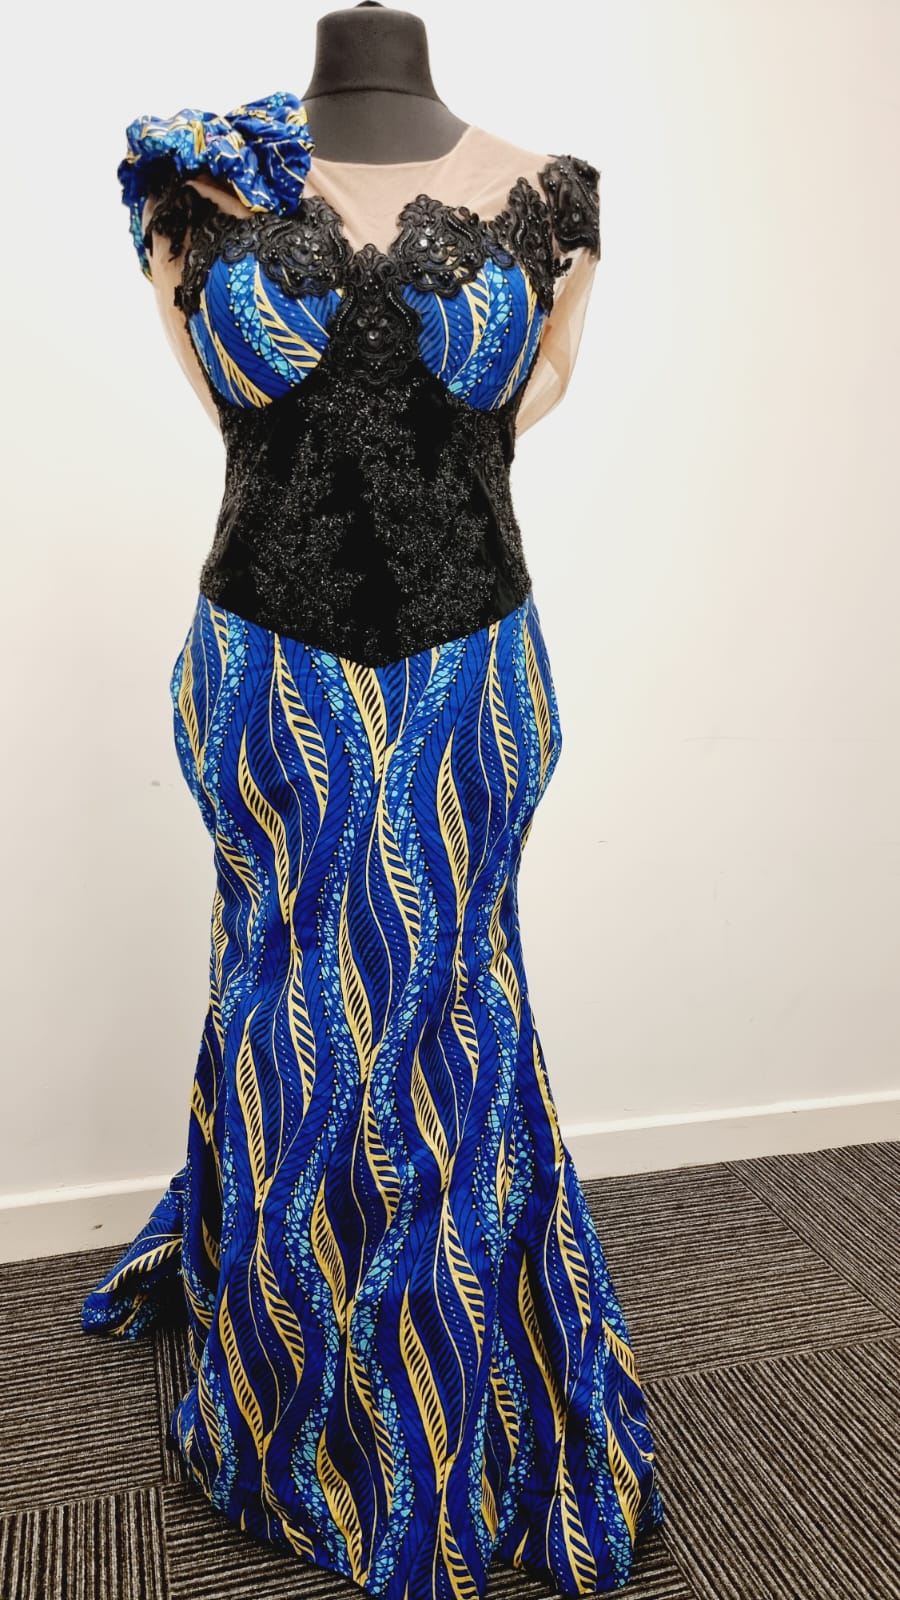 Blue & Gold African Print Party Dress - House of Prints